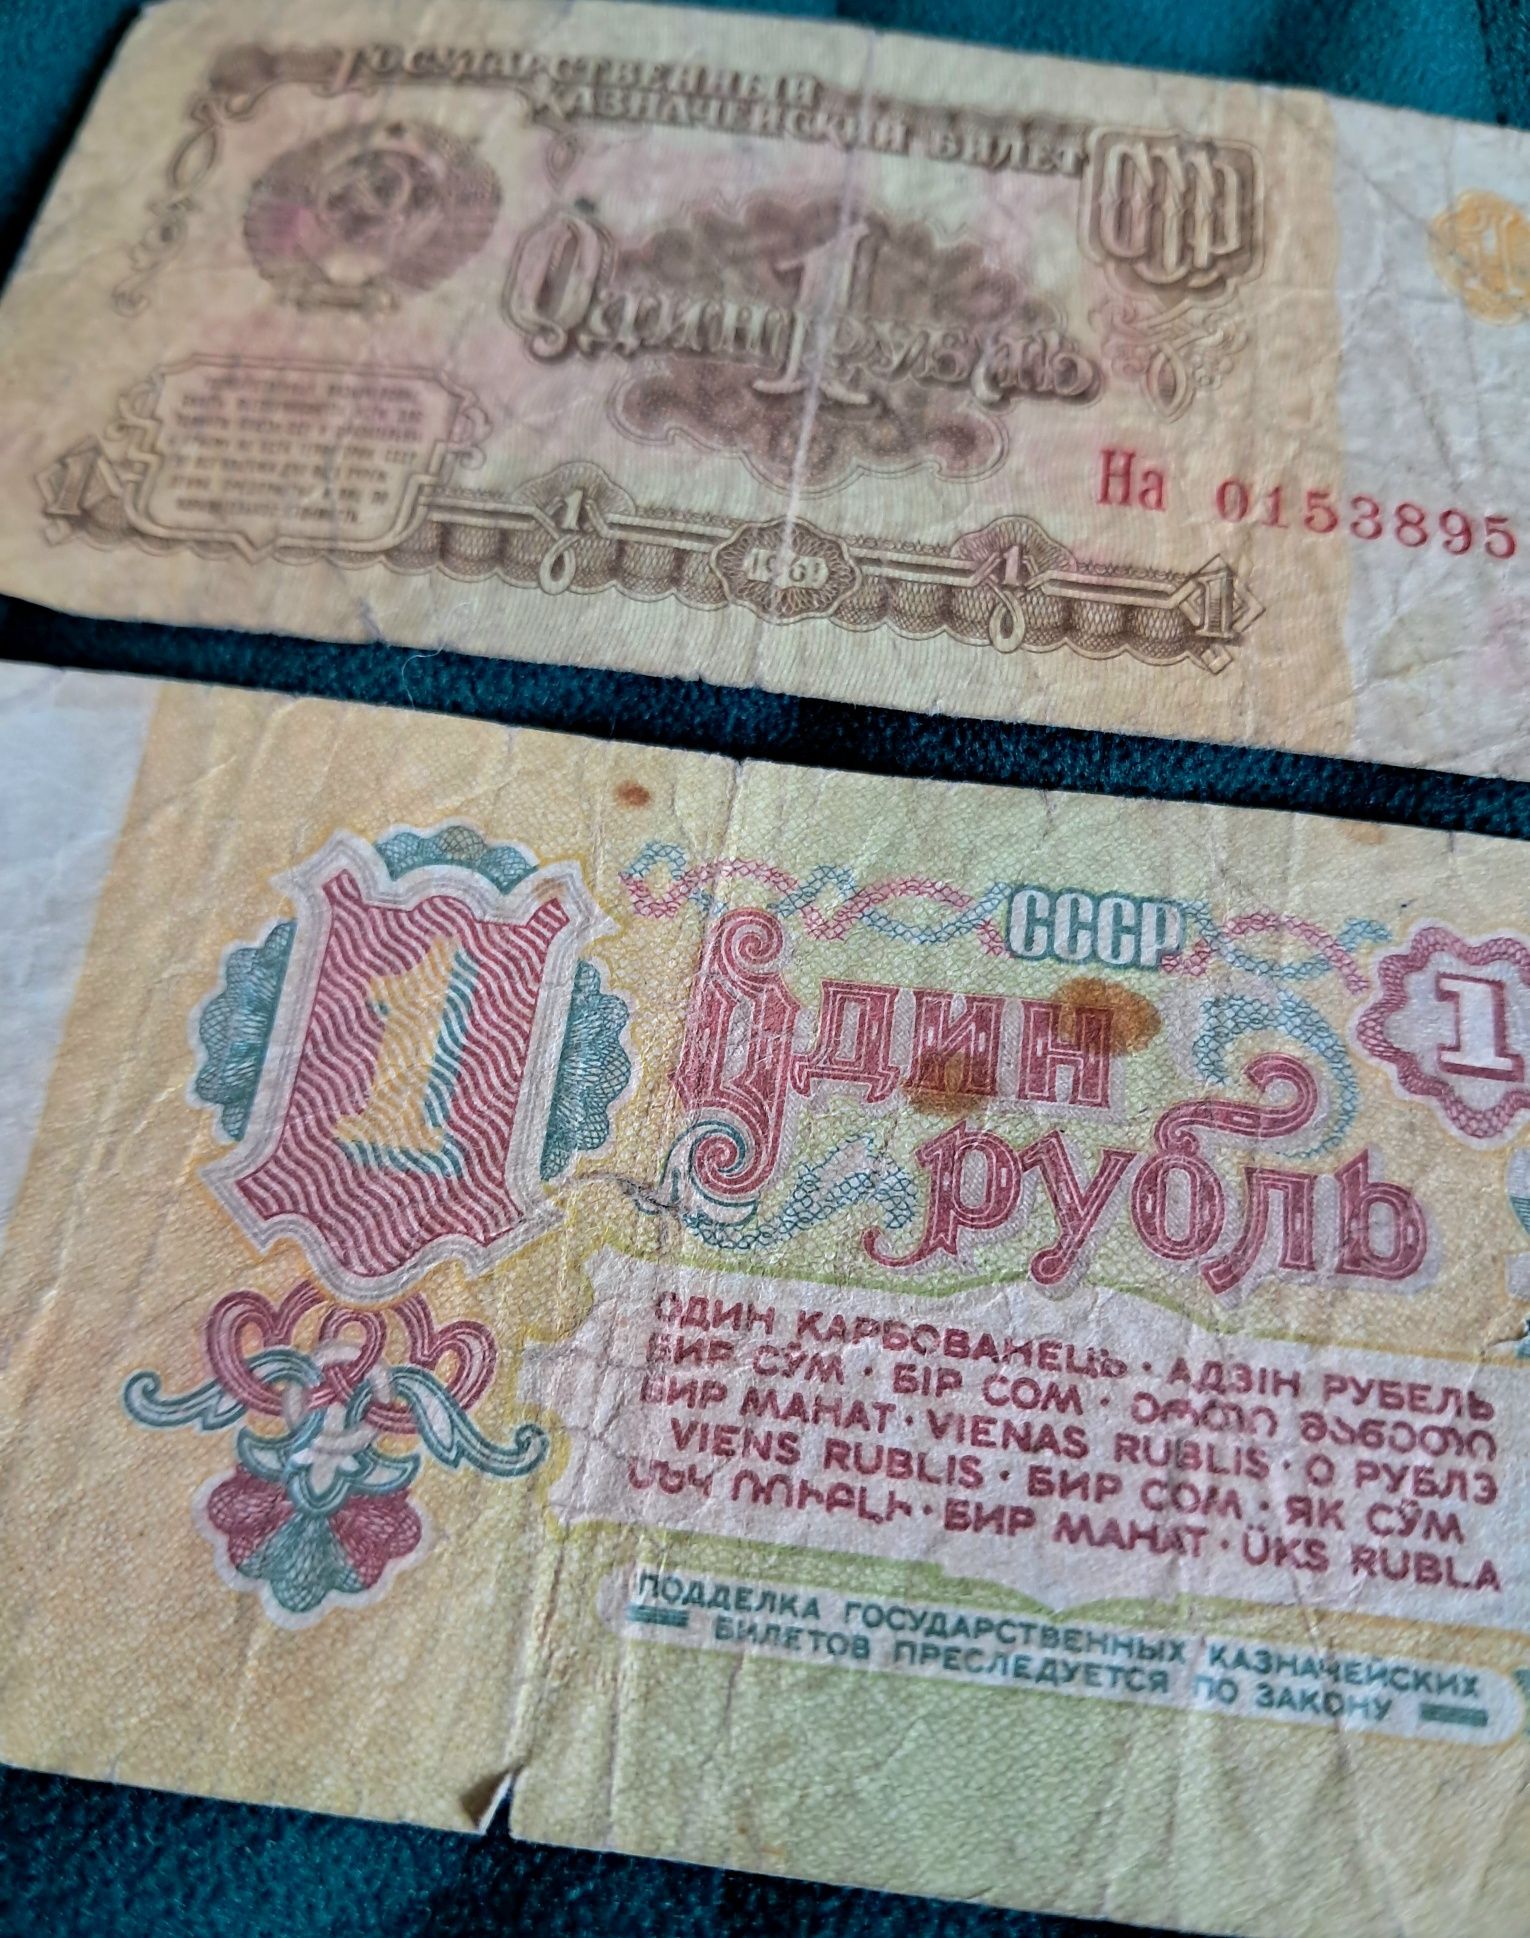 Stary banknot 1 rubel 1961 r antyk ZSSR stare ruble banknoty monety